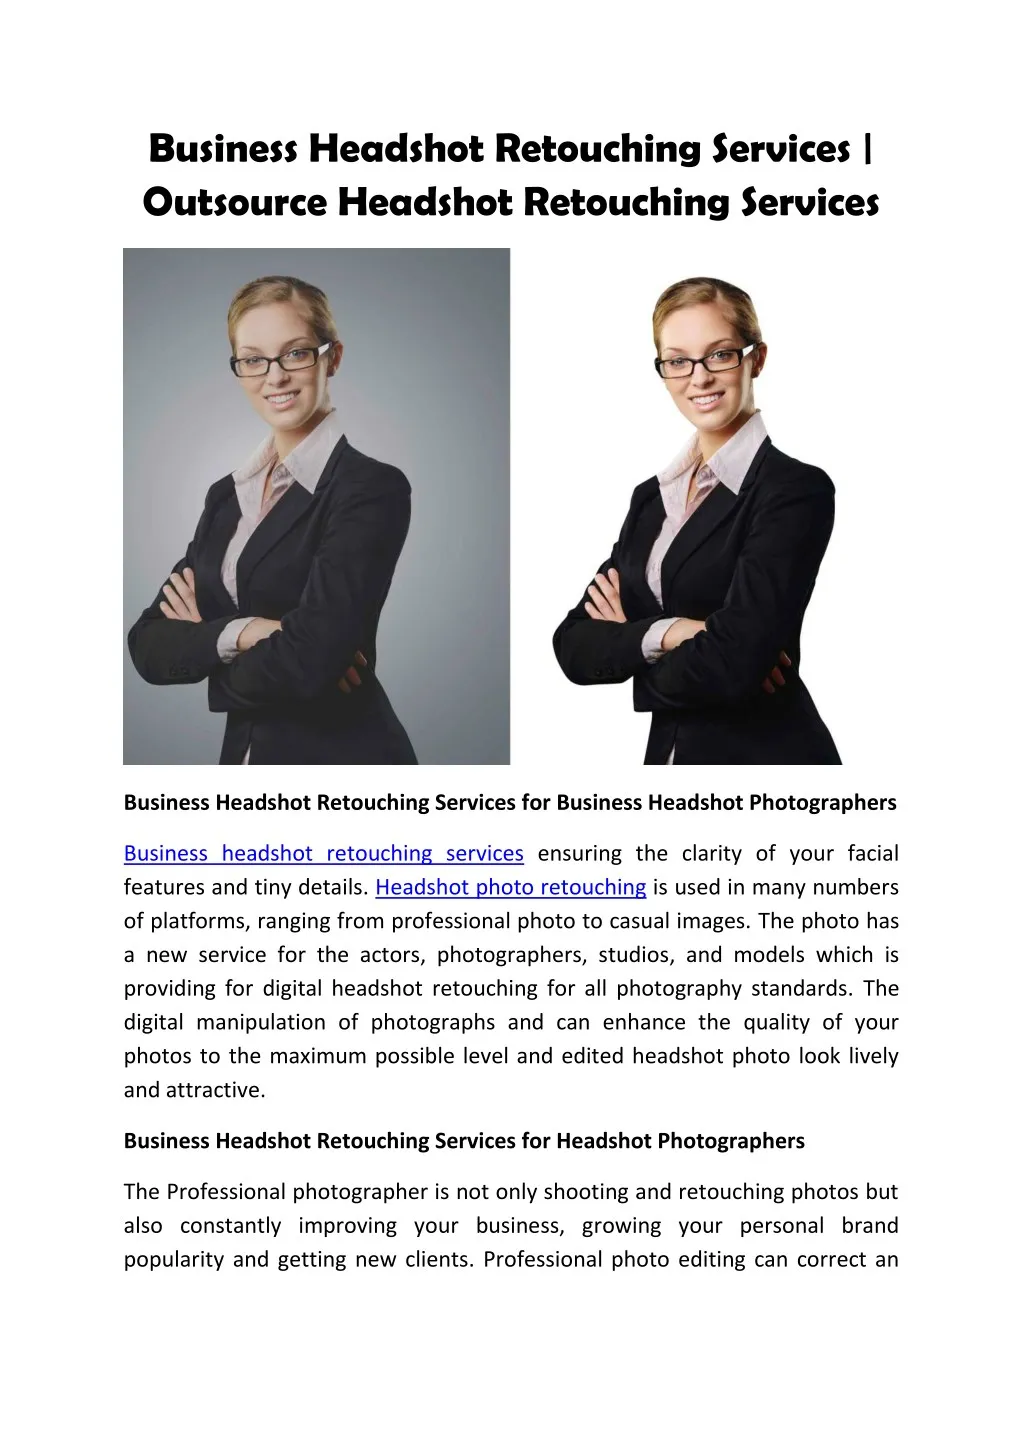 business headshot retouching services outsource